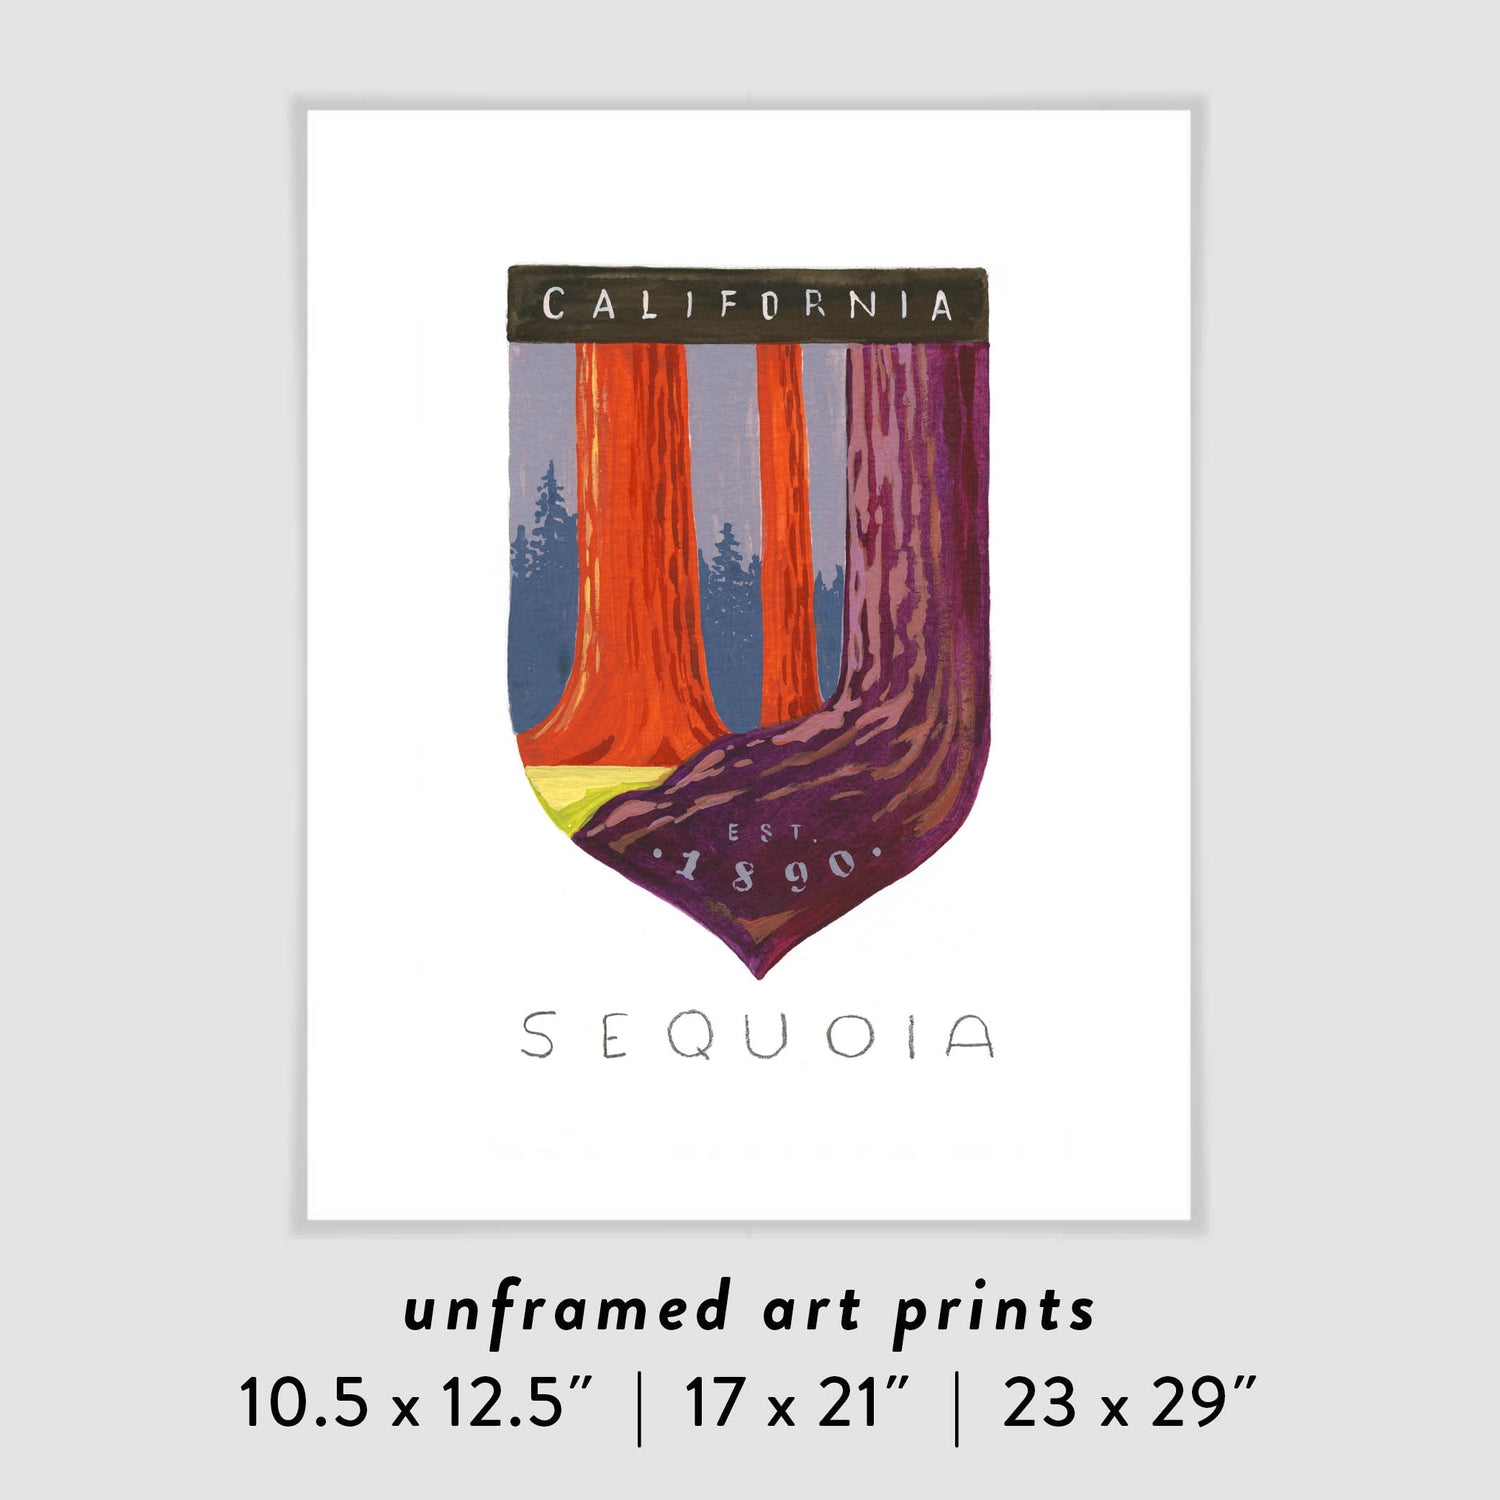 Sequoia National Park art print with giant California sequoia trees; trendy illustration by Angela Staehling